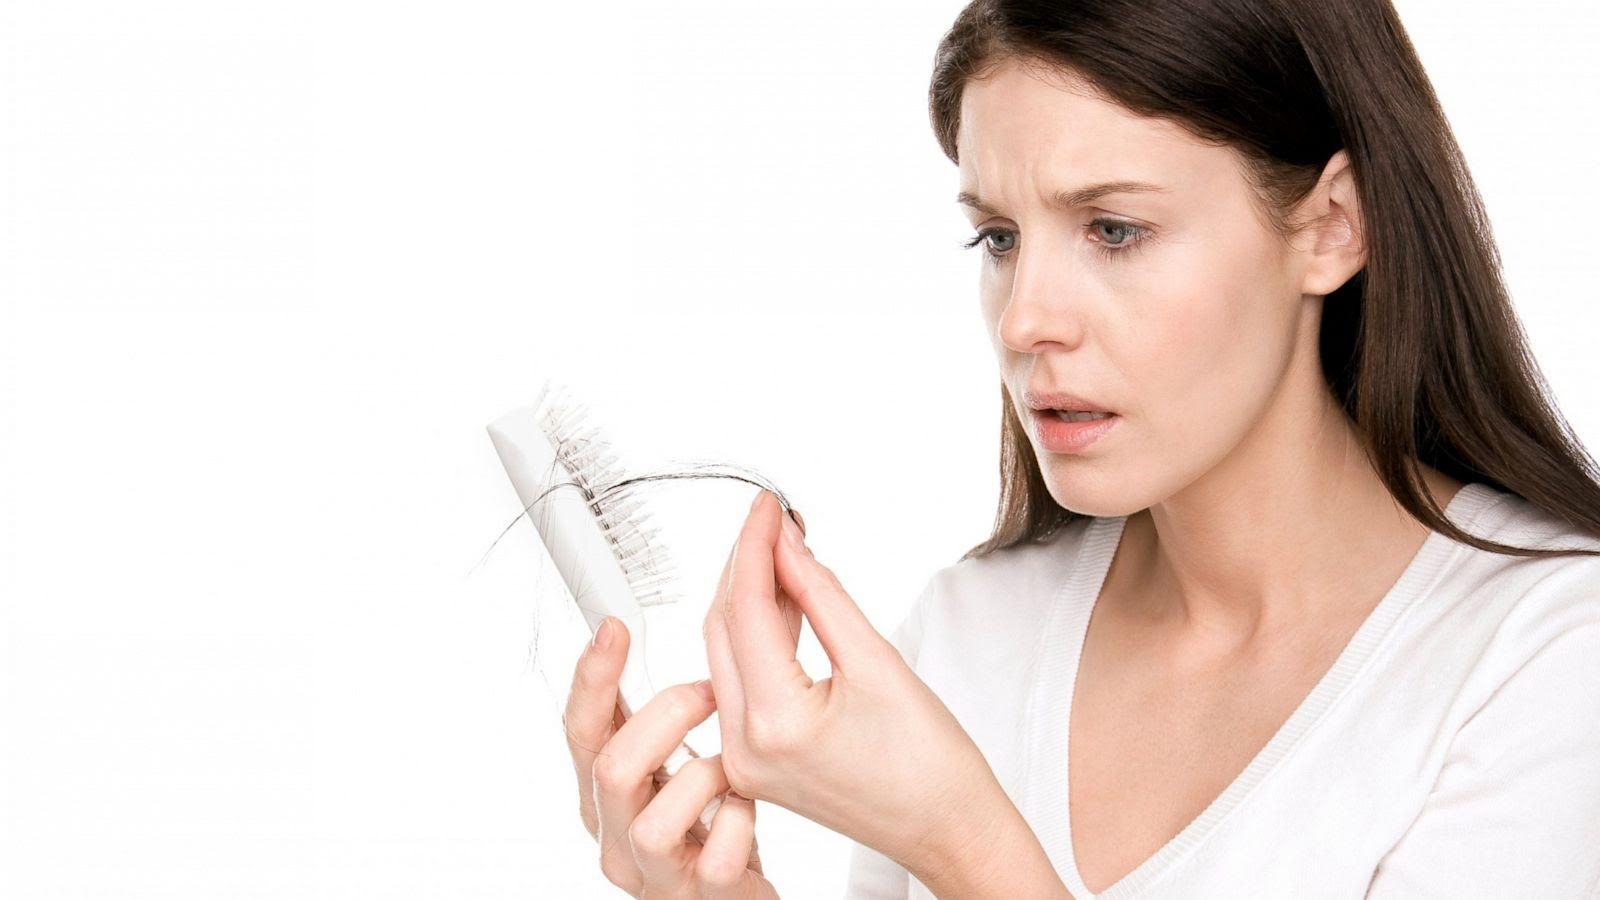 Steps How To Stop Hair Loss